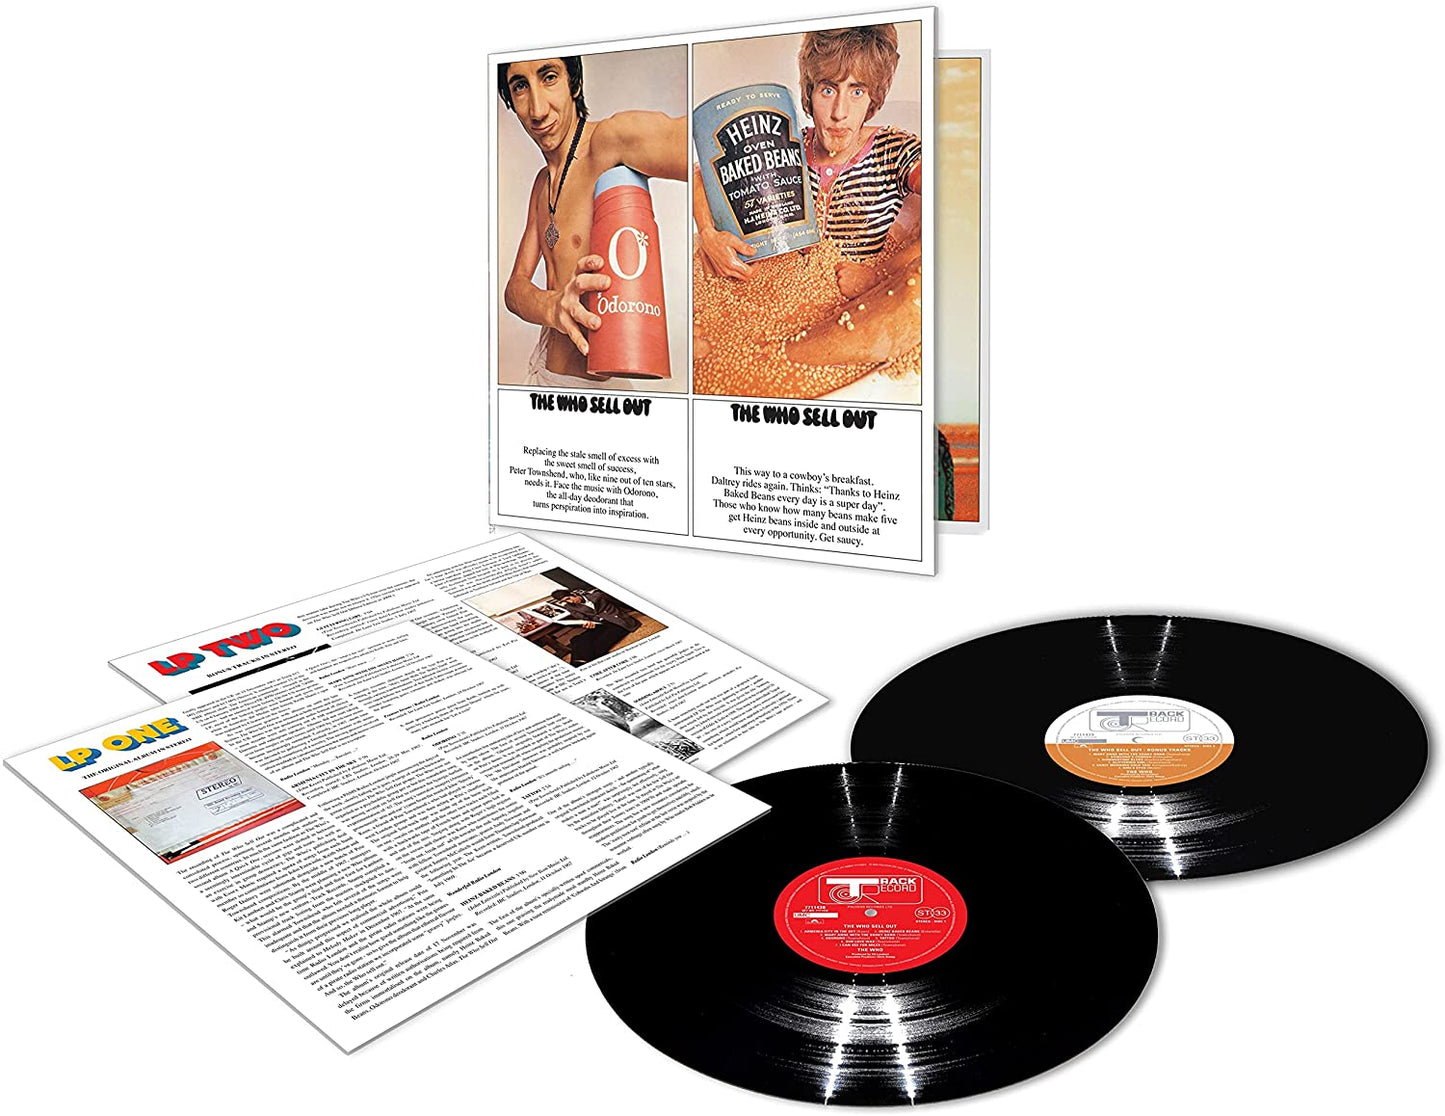 The Who - The Who Sell Out (Deluxe) - 2LP